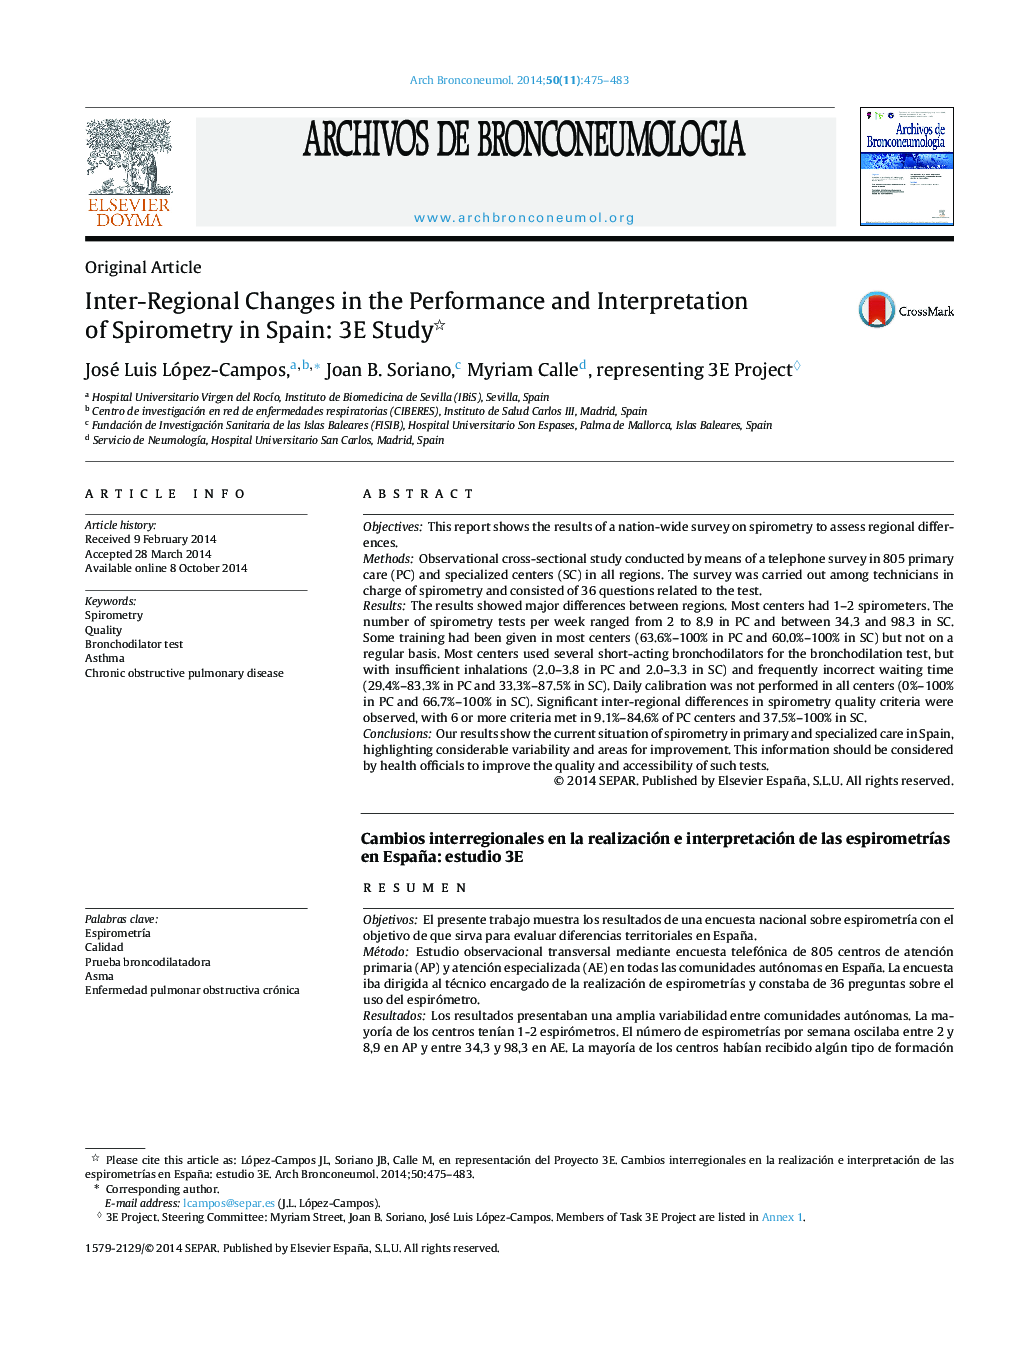 Inter-Regional Changes in the Performance and Interpretation of Spirometry in Spain: 3E Study 